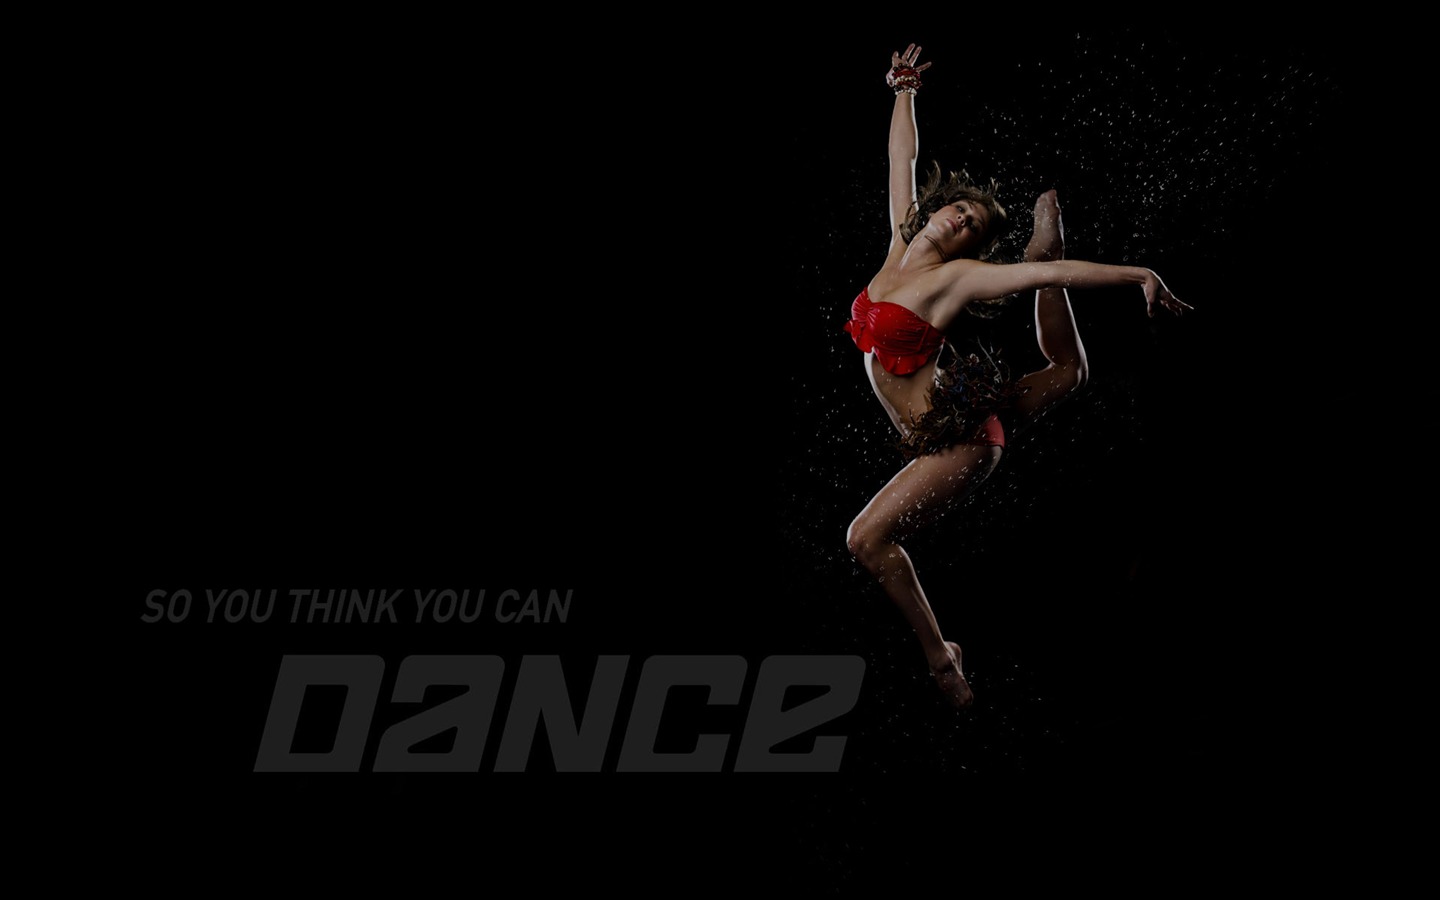 So You Think You Can Dance wallpaper (2) #13 - 1440x900